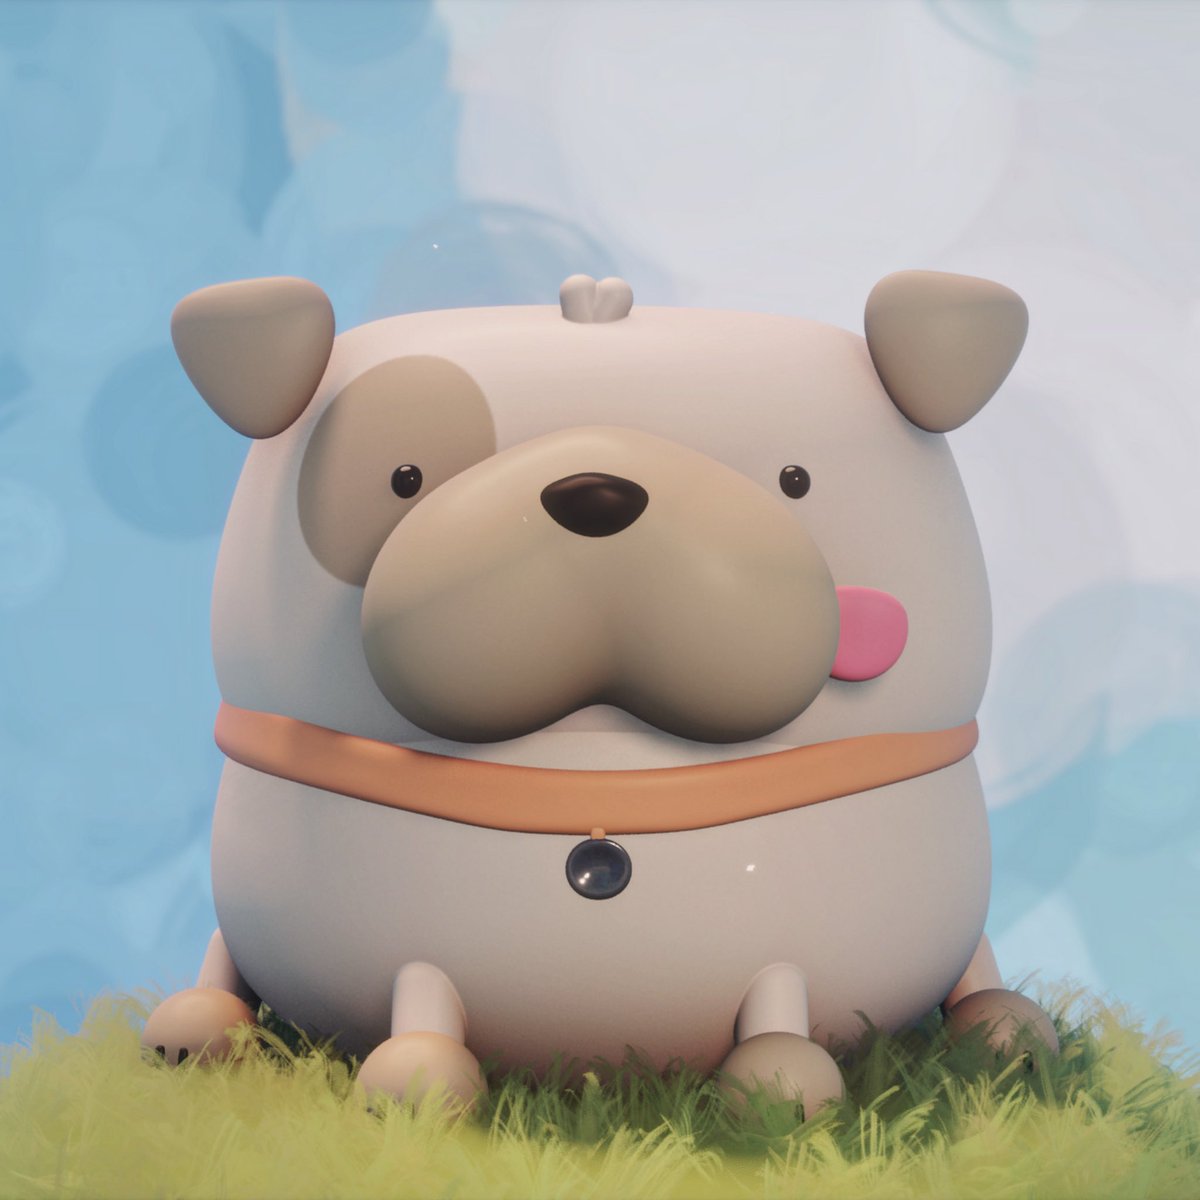 Alfonso 🐾

#MadeinDreams